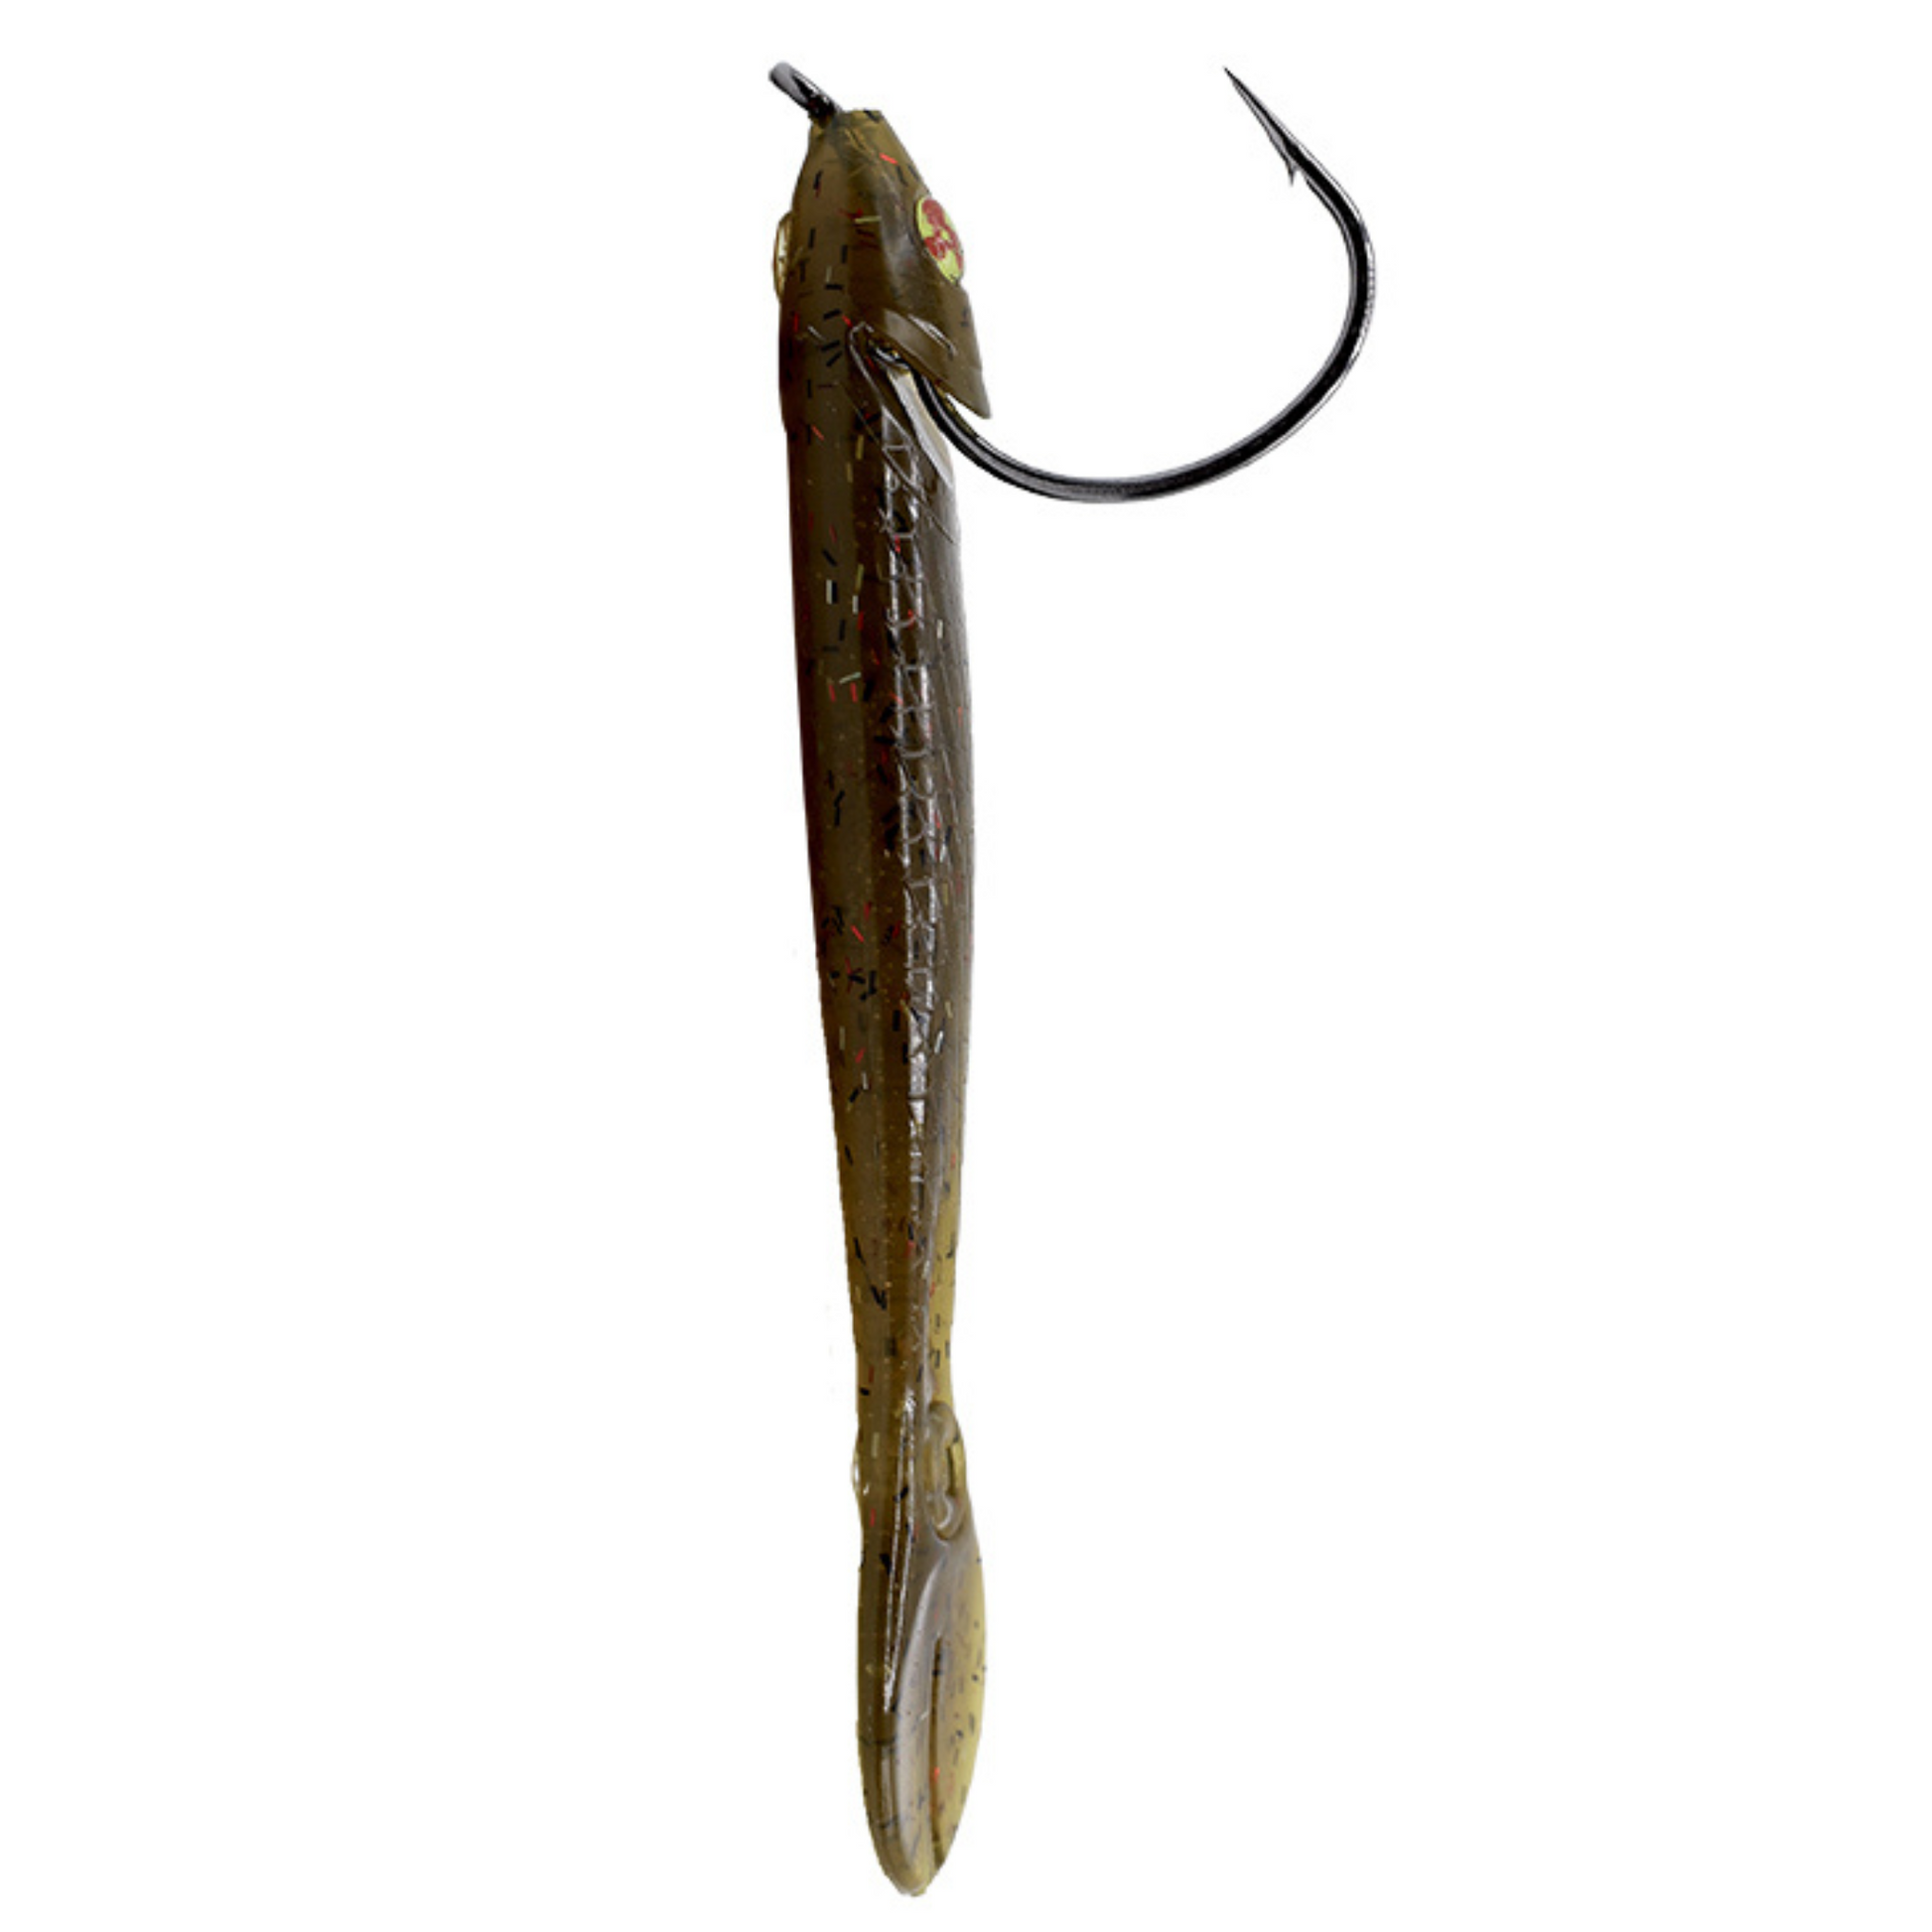 4.25 5pc. Recoil Baits - Green Pumpkin – Lawless Lures